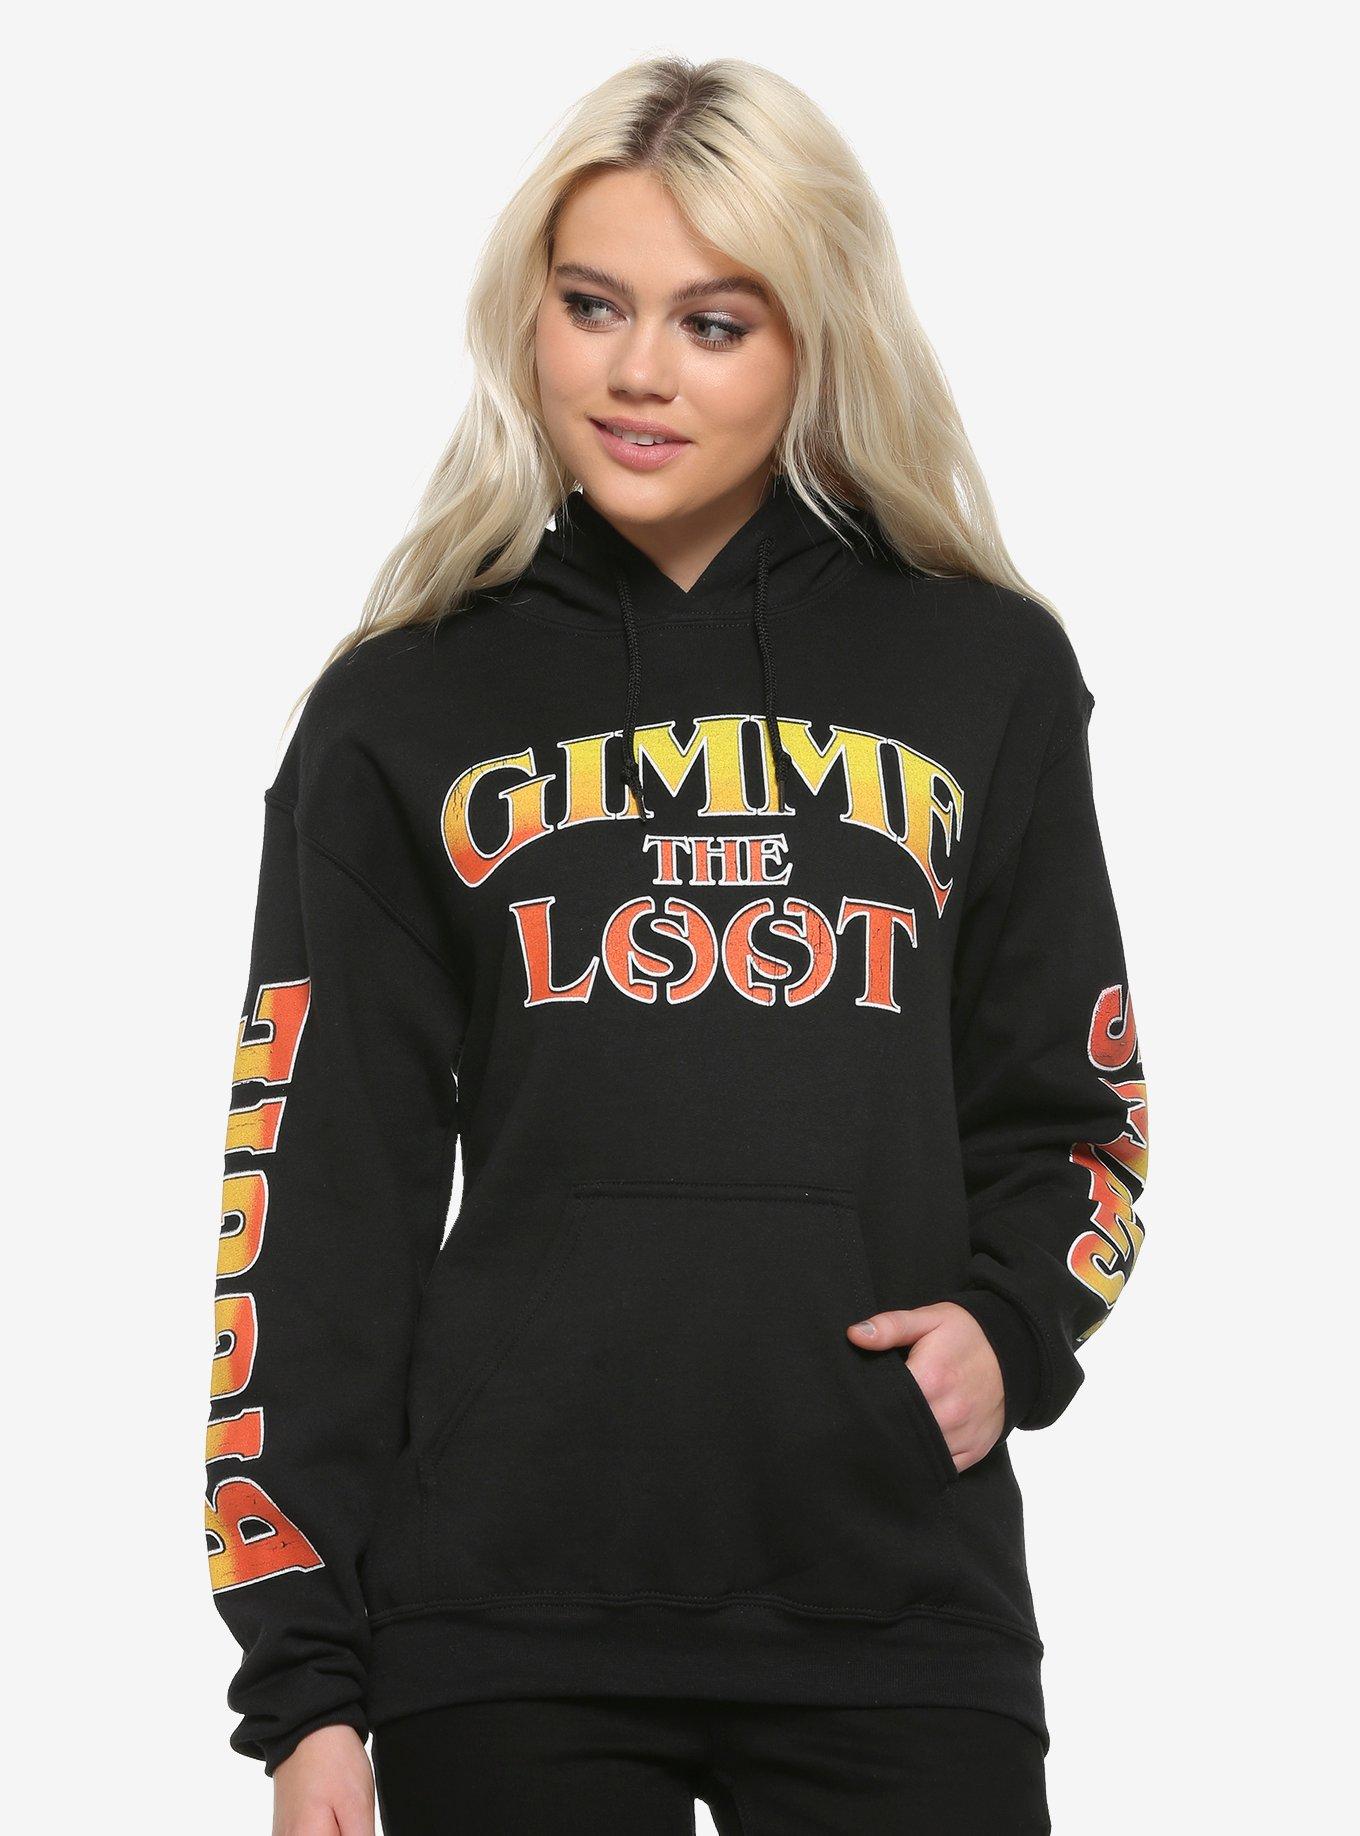 The Notorious B.I.G. Gimme The Loot Girls Hoodie, BLACK, hi-res